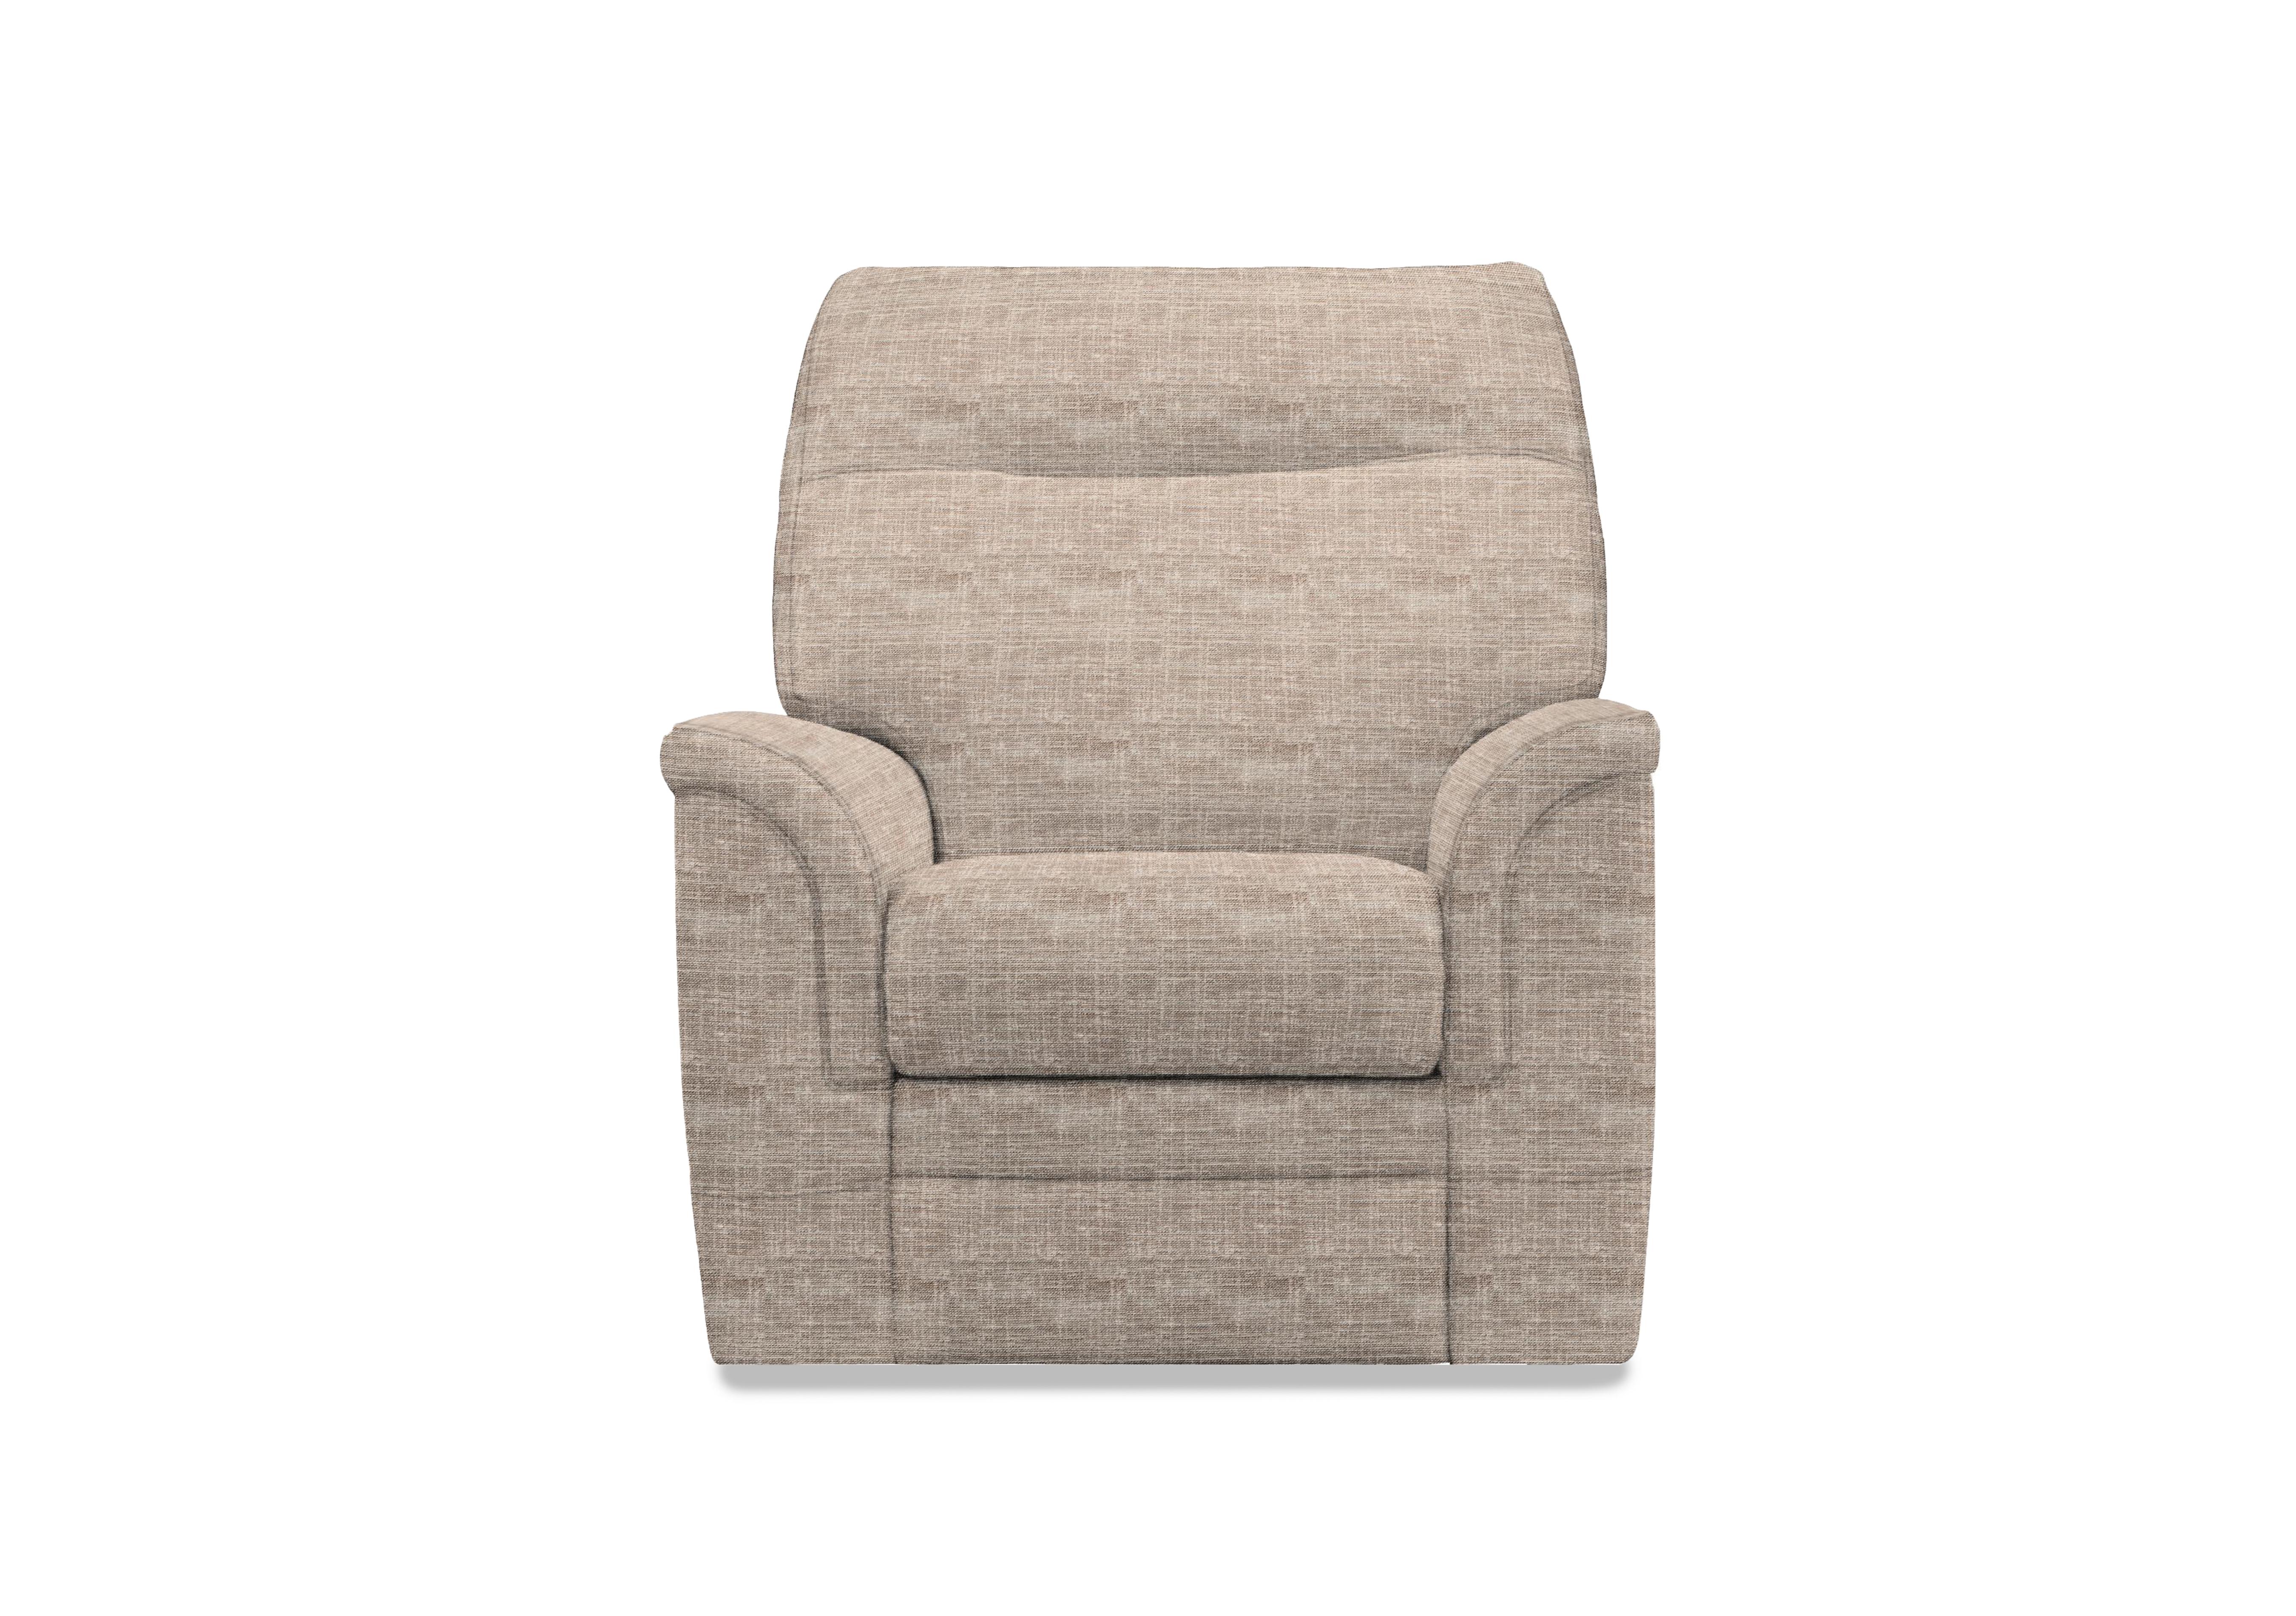 Hudson 23 Fabric Power Recliner Chair with Power Headrest and Power Lumbar in Dash Oatmeal 001497-0051 on Furniture Village